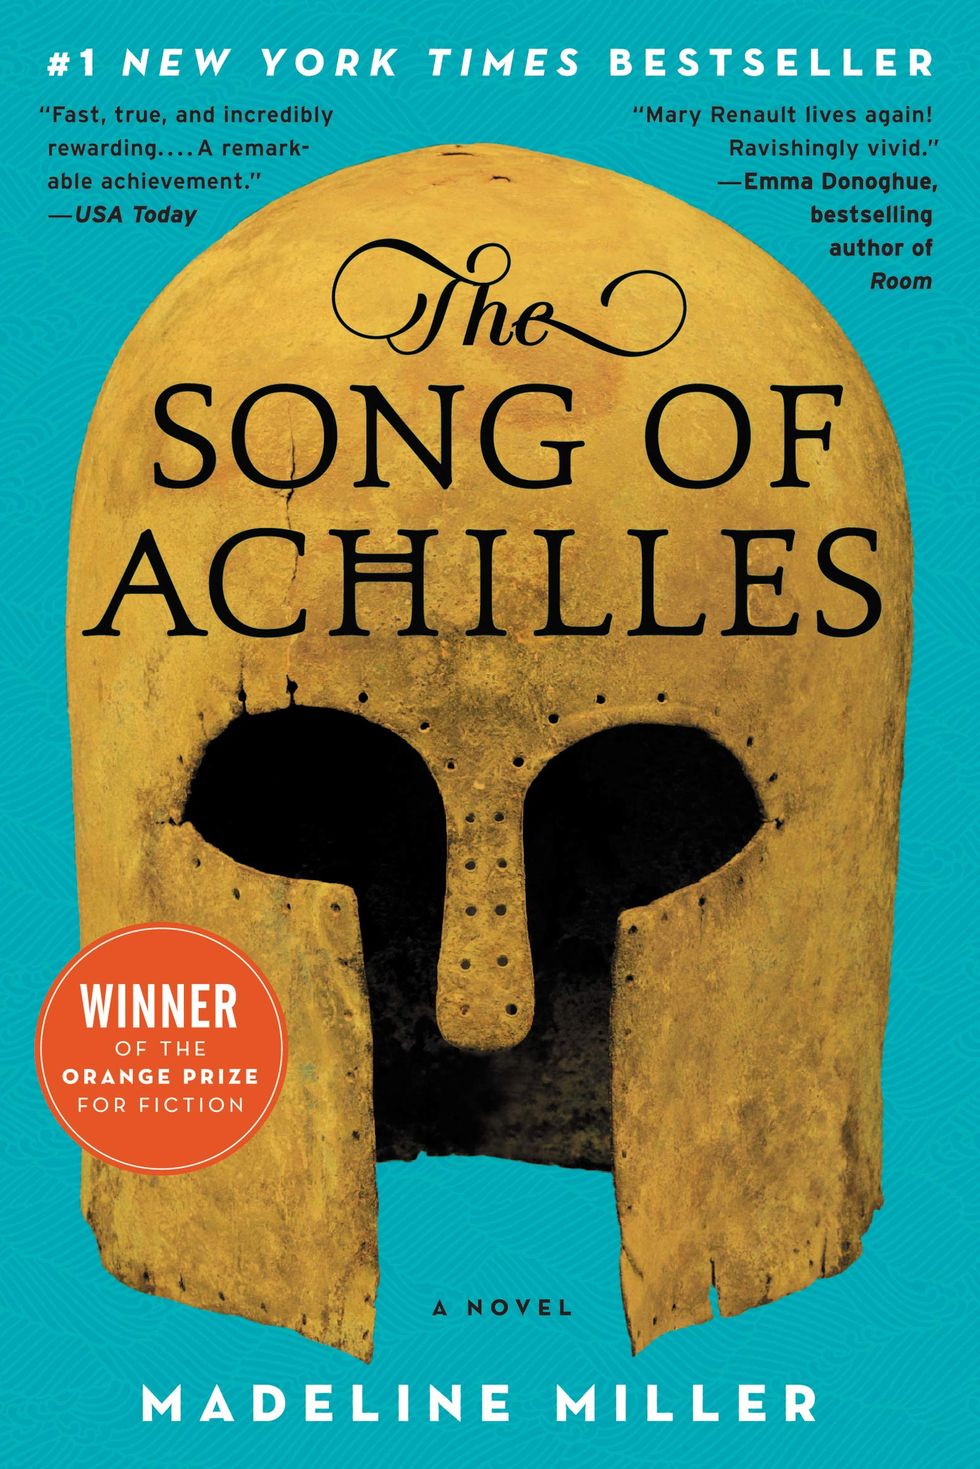 The Song of Achilles by Madeline Miller (2012)